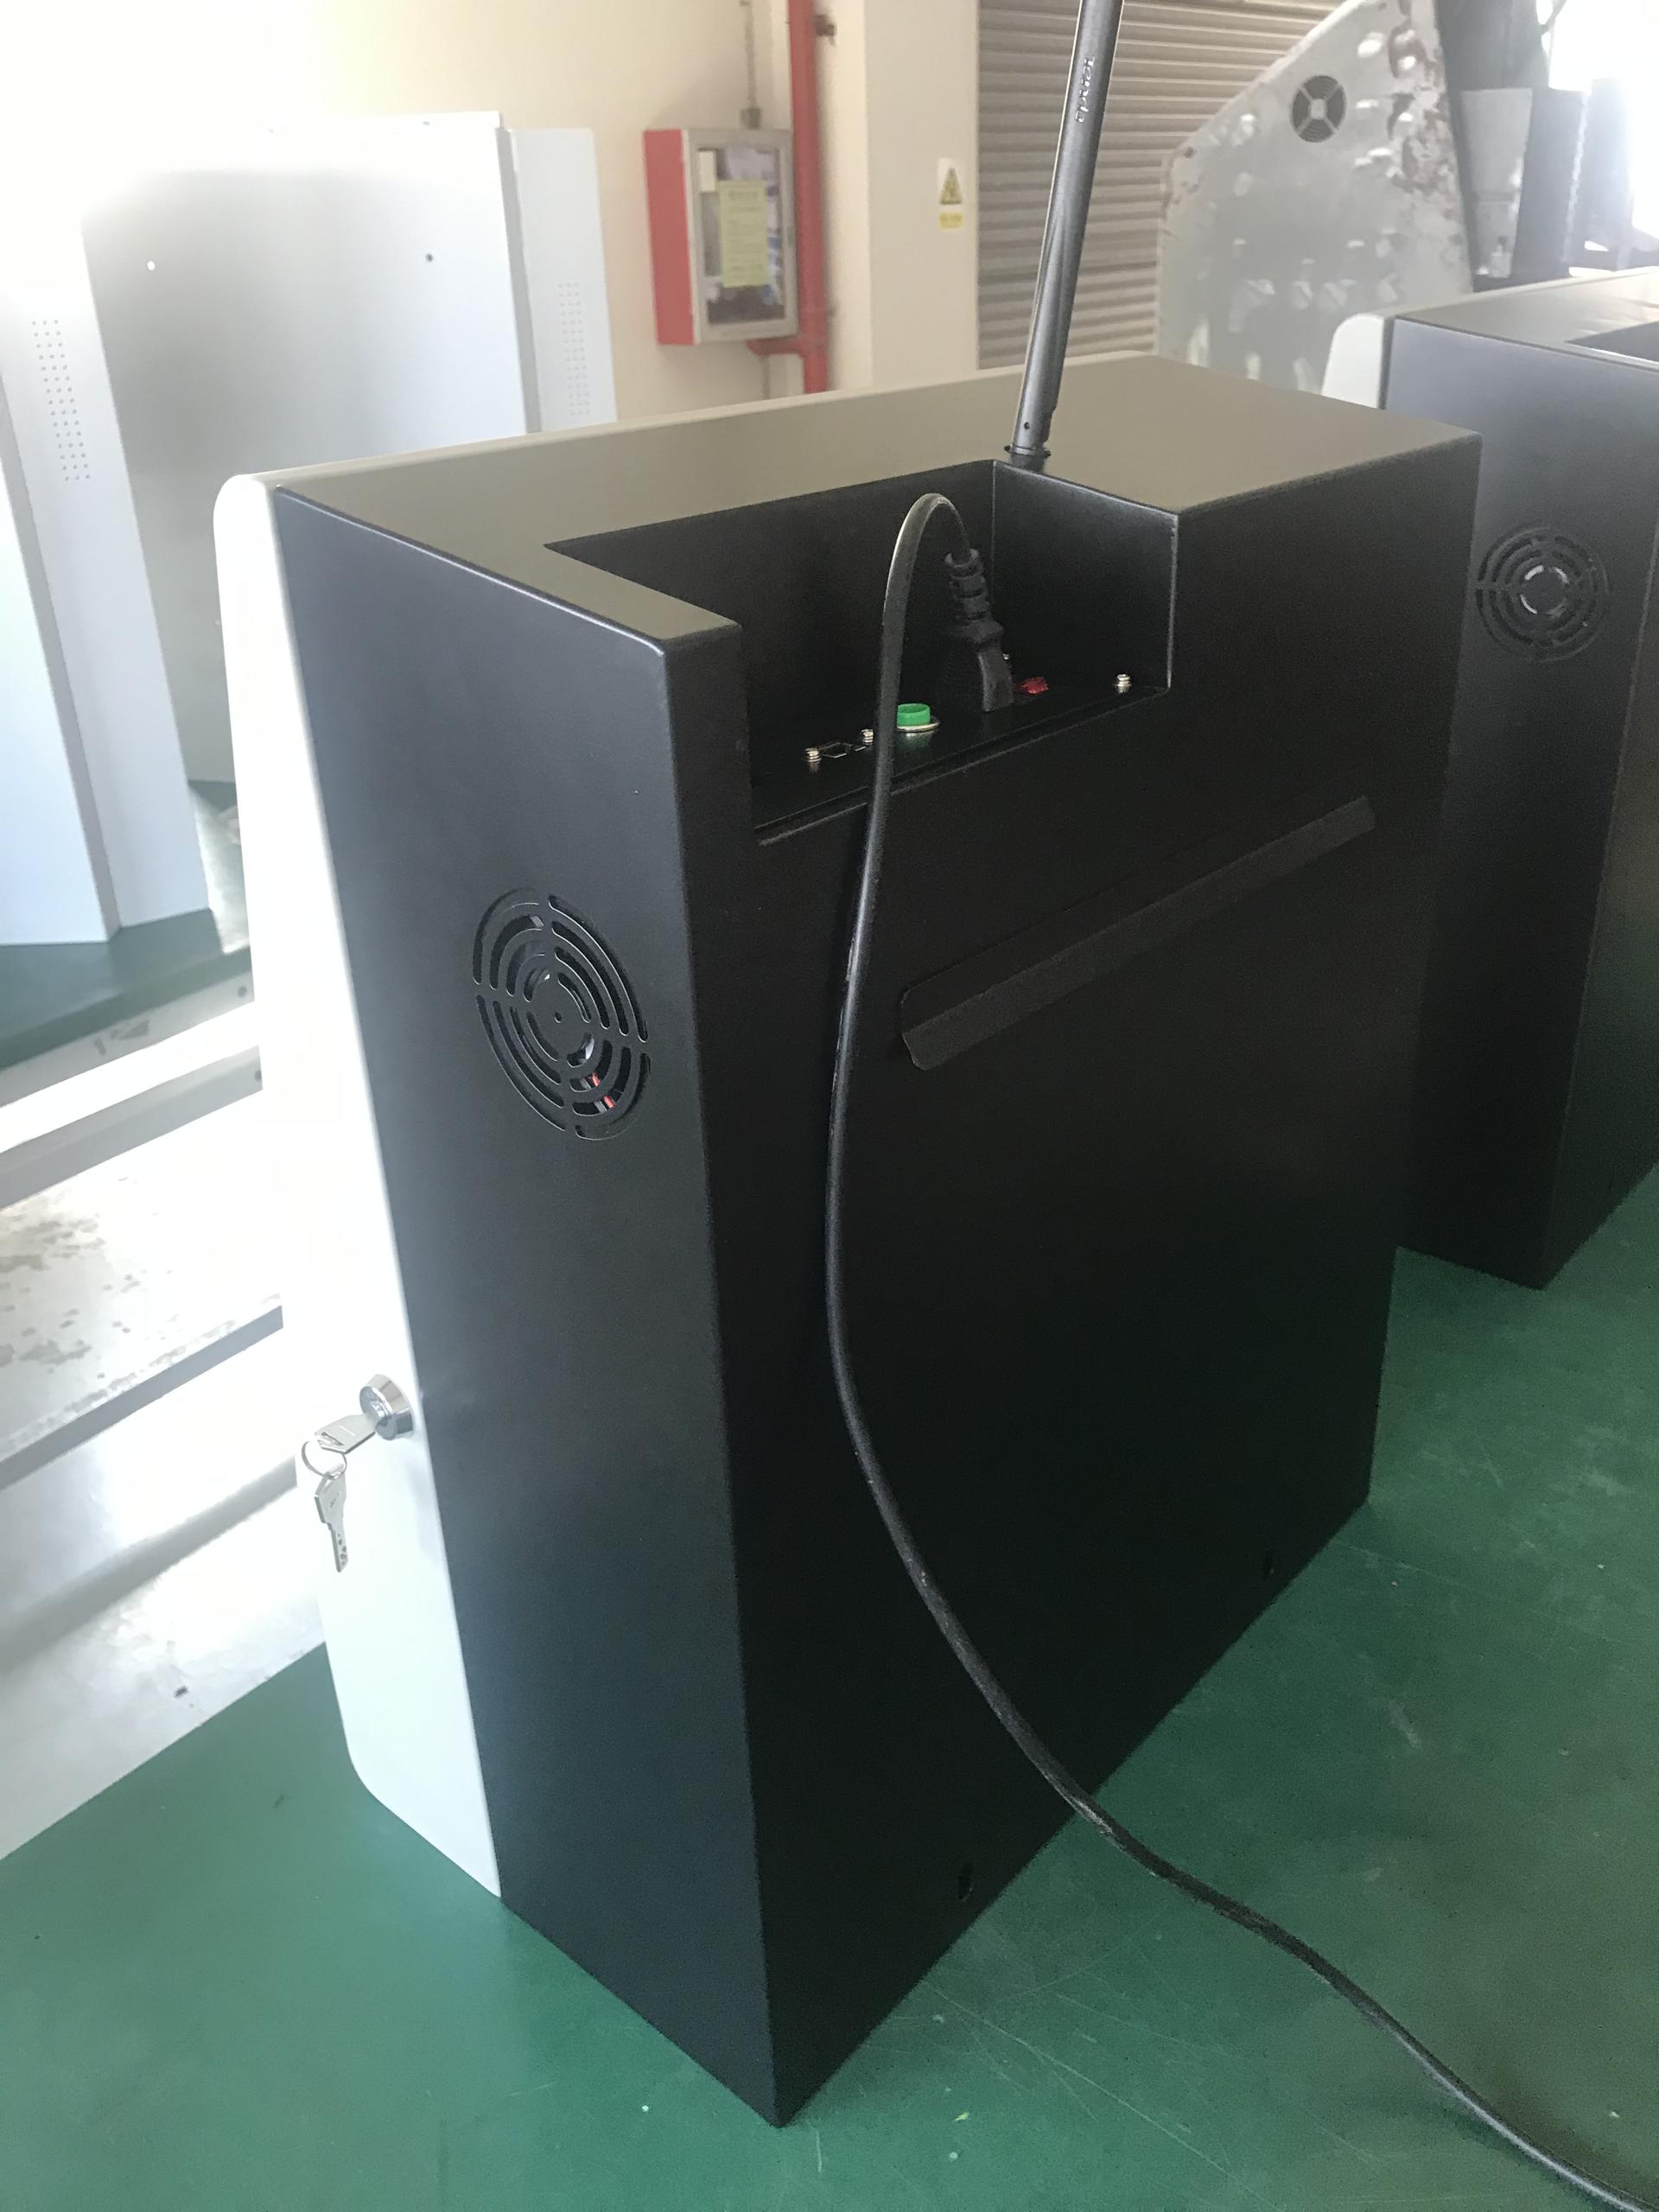 Kiosk Factory Weighing Kiosk with Barcode Scanner